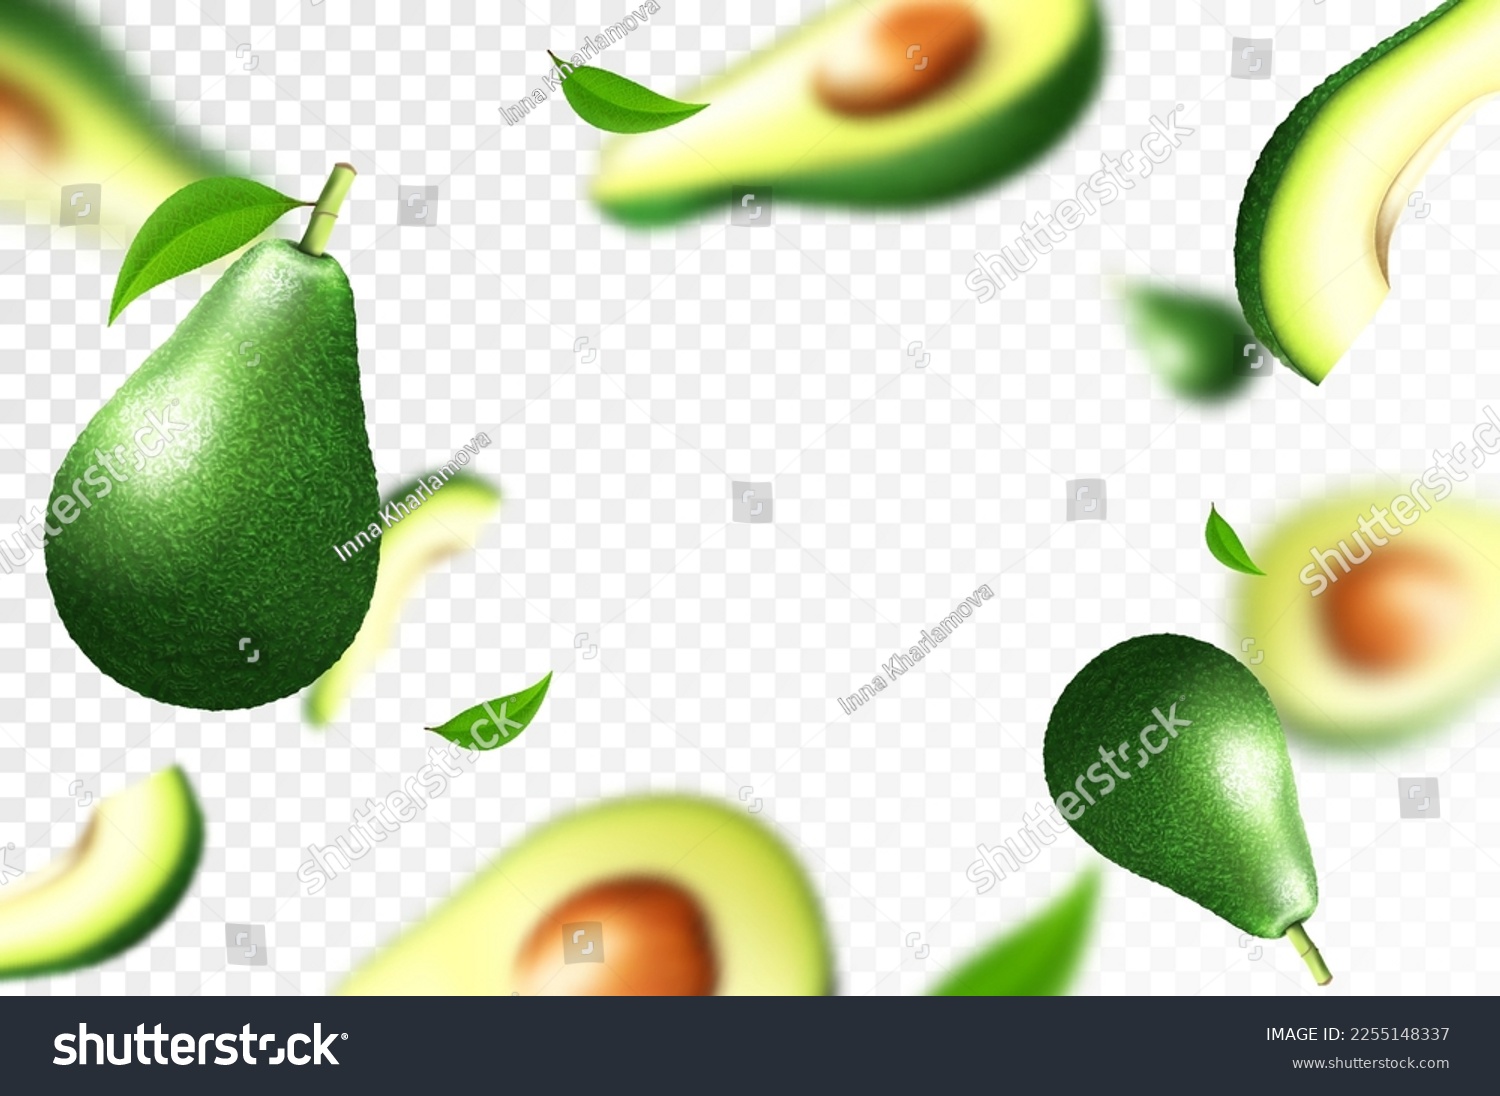 Avocado background. Flying whole, half and slices of fresh avocado. Unfocused and blurry effect. Can be used for wallpaper, banner, print, wrapping paper. Realistic 3d vector illustration. #2255148337